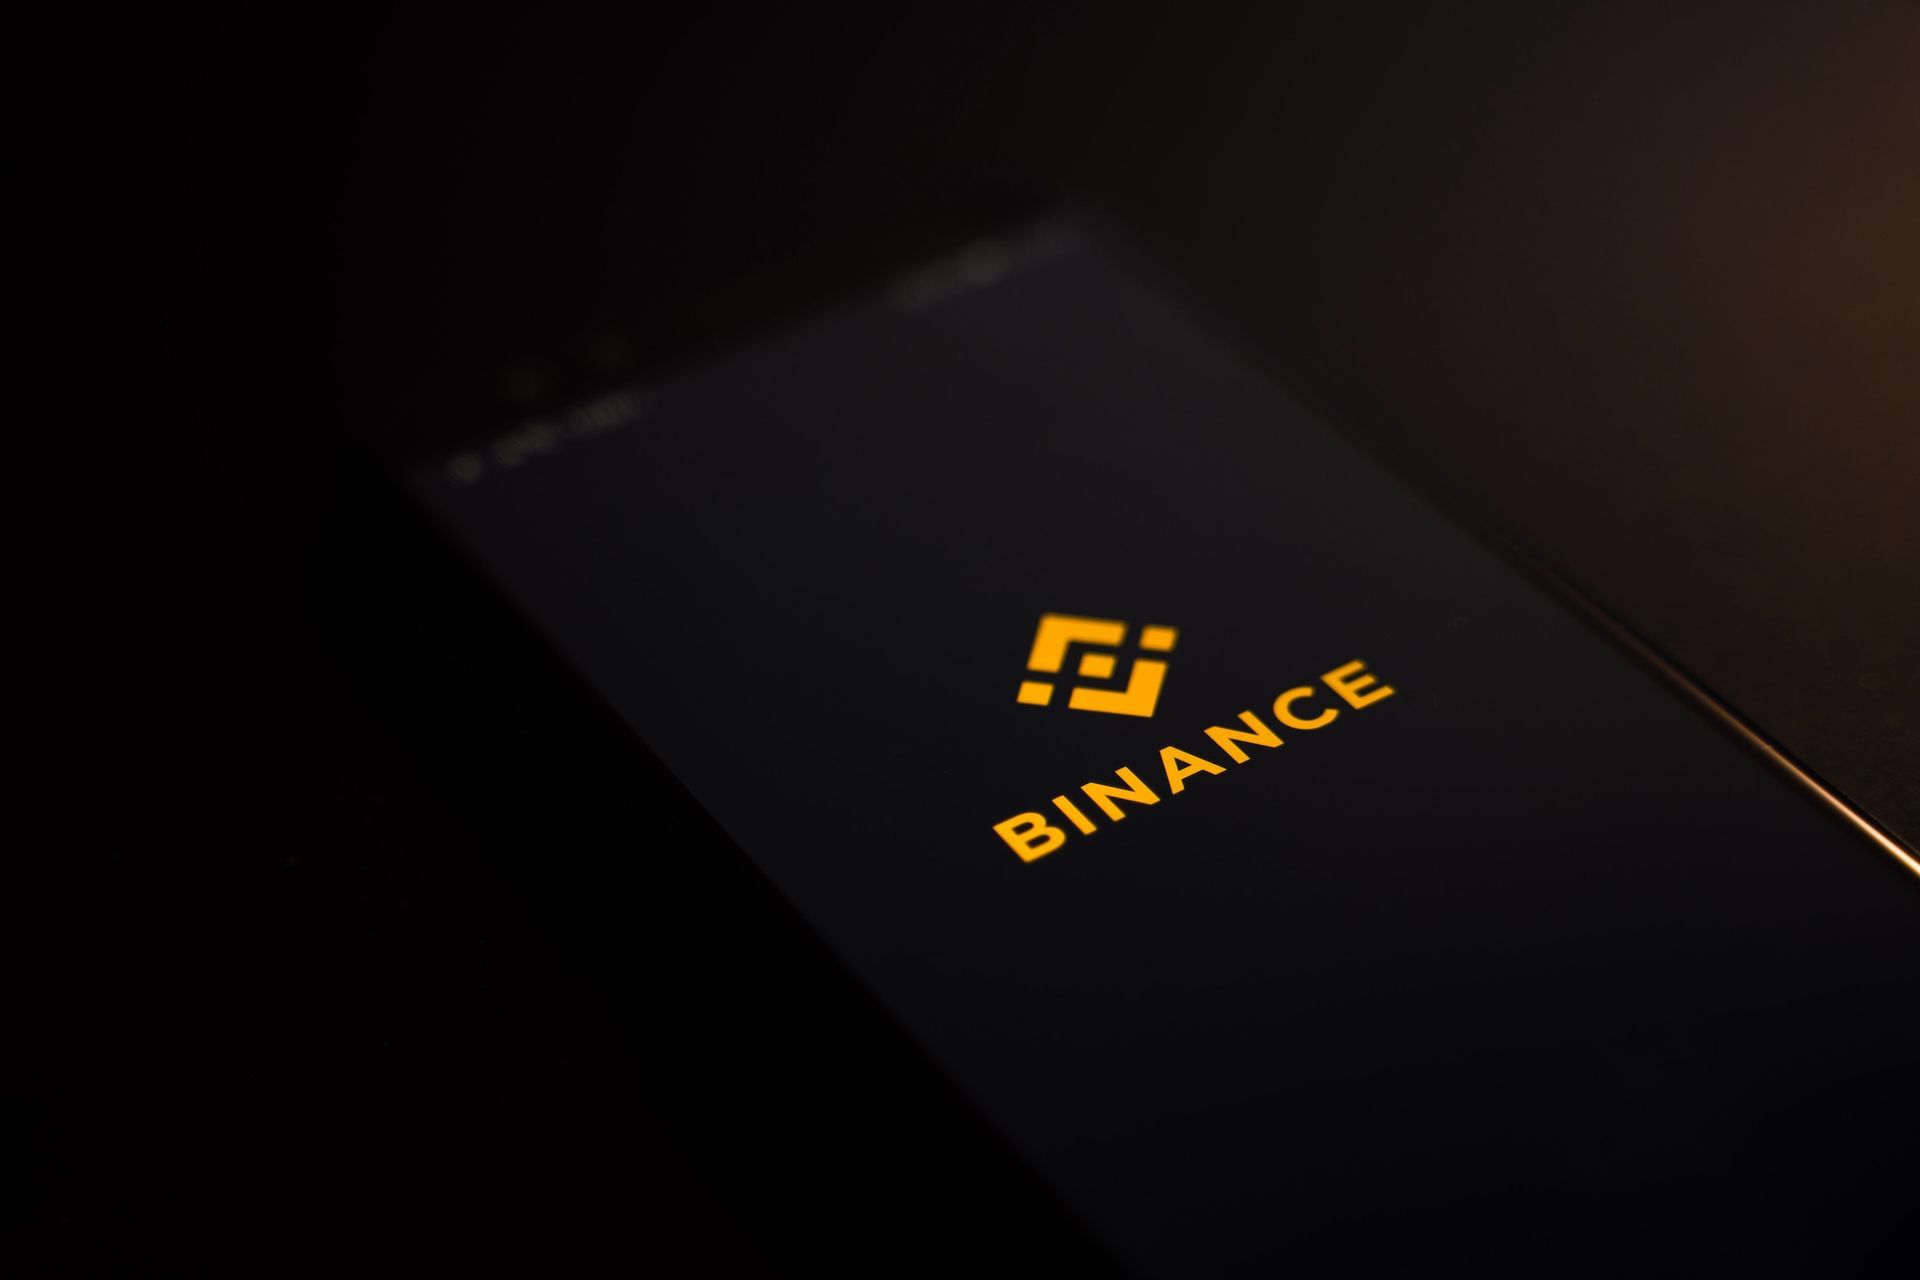 Binance Word of the Day answers